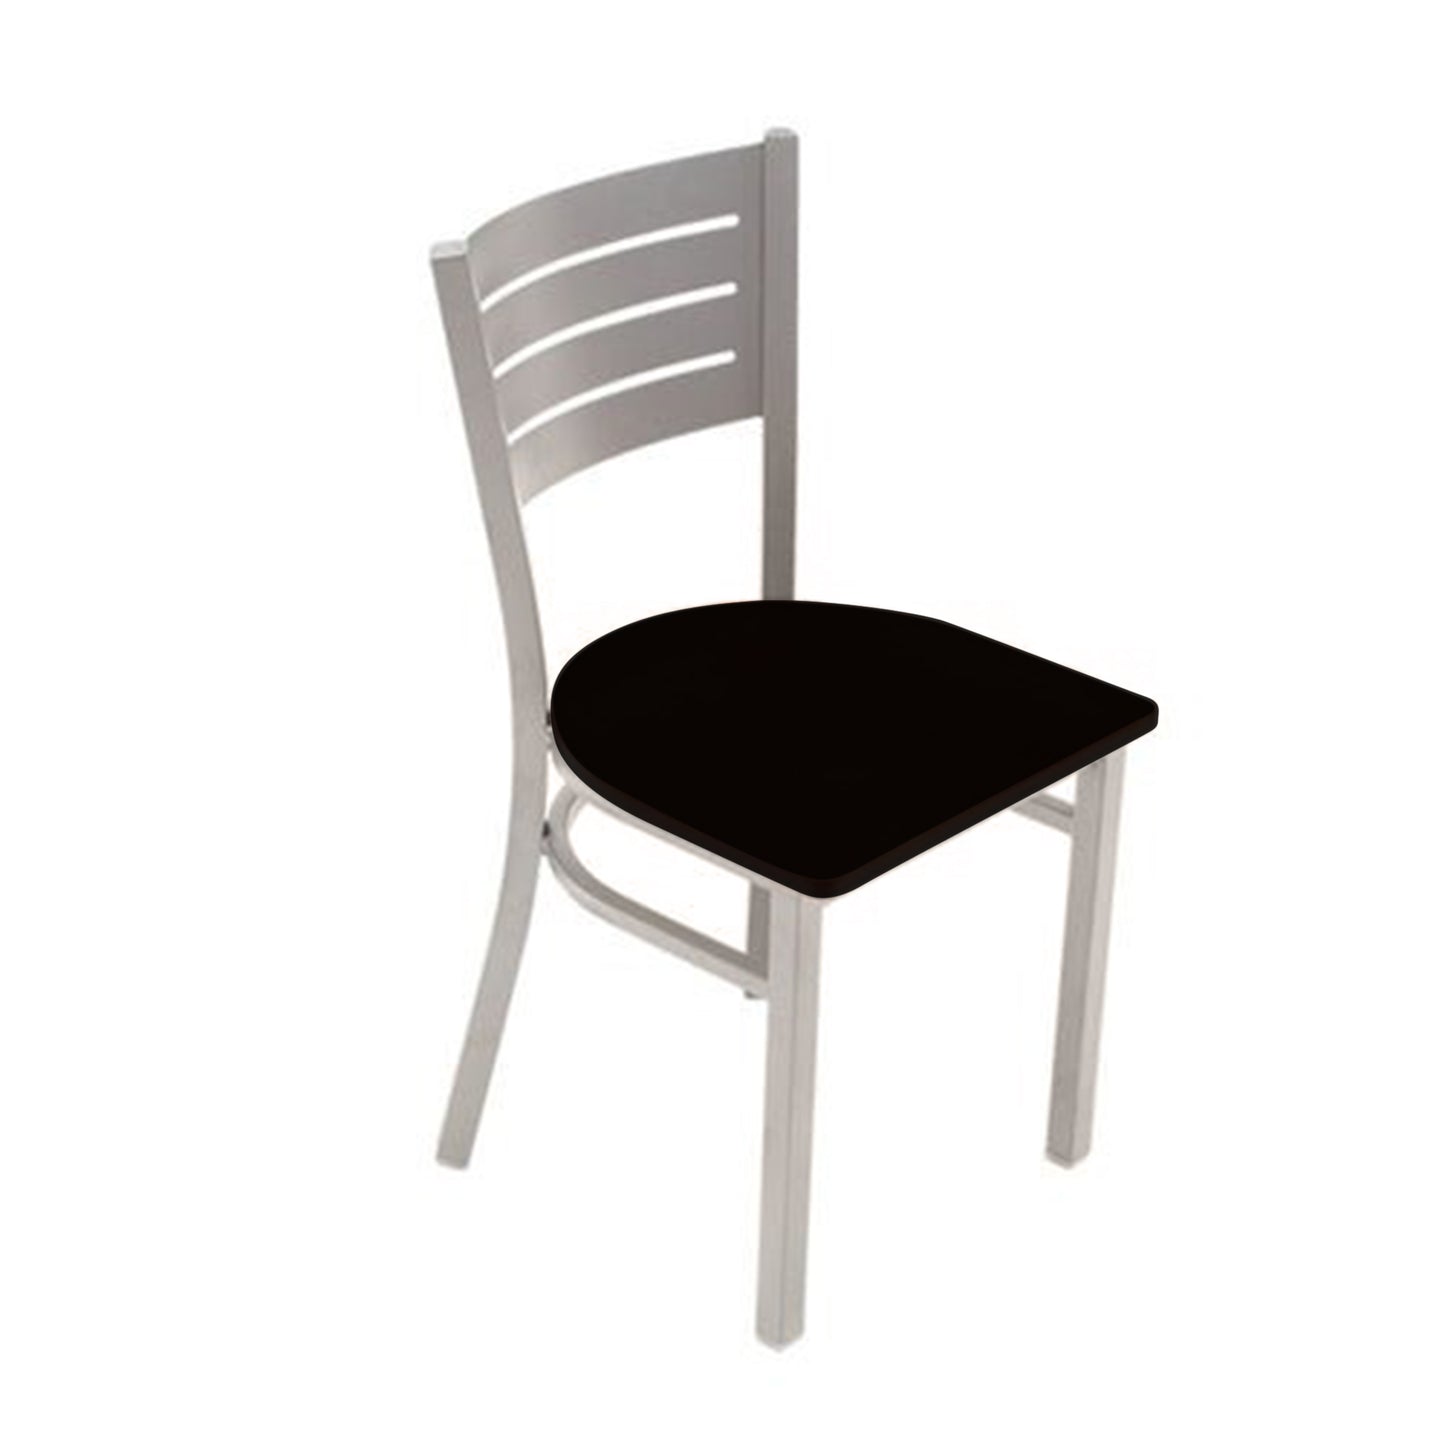 AmTab Cafe Chair - 16.5"W x 19"L x 33.5"H - Seat Height 18.25"H  (AMT-CAFECHAIR-2)